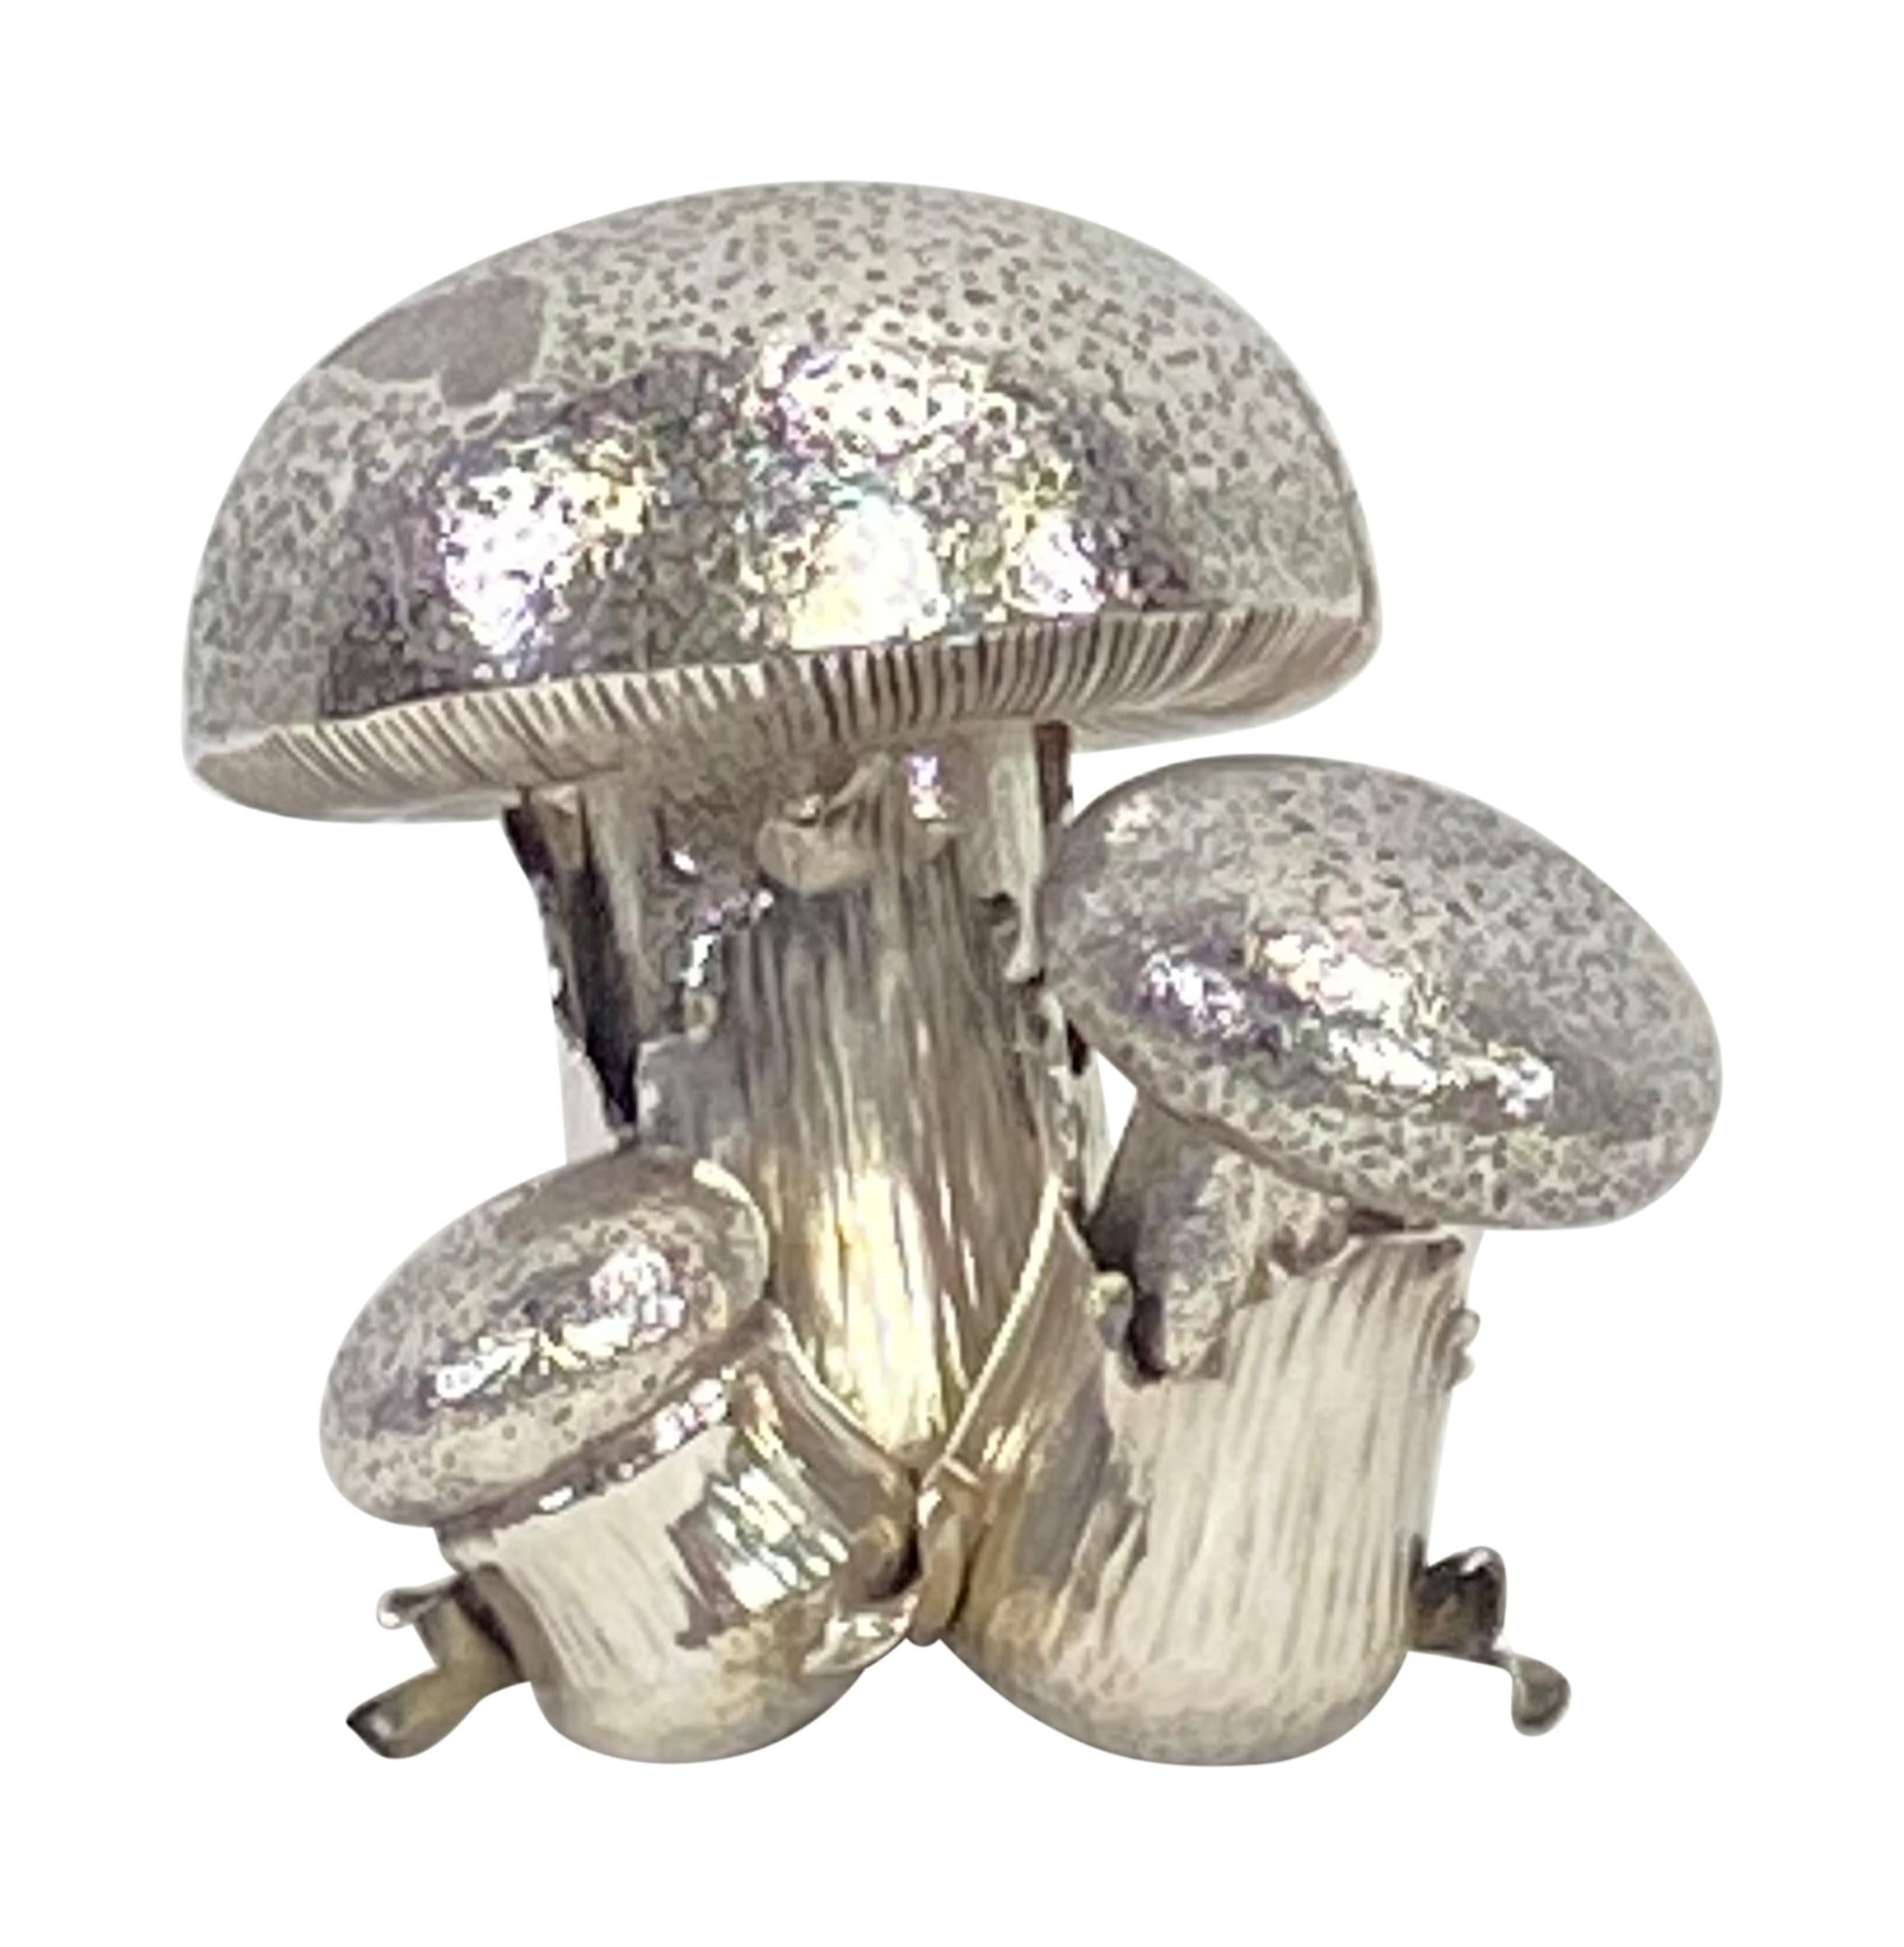 This elegant modernist salt shaker and pepper shaker were handcrafted and signed by Buccellati in Italy. The set features a cluster of three trumpet mushroom. The larger one represents the pepper shaker , while the medium sized one represents the